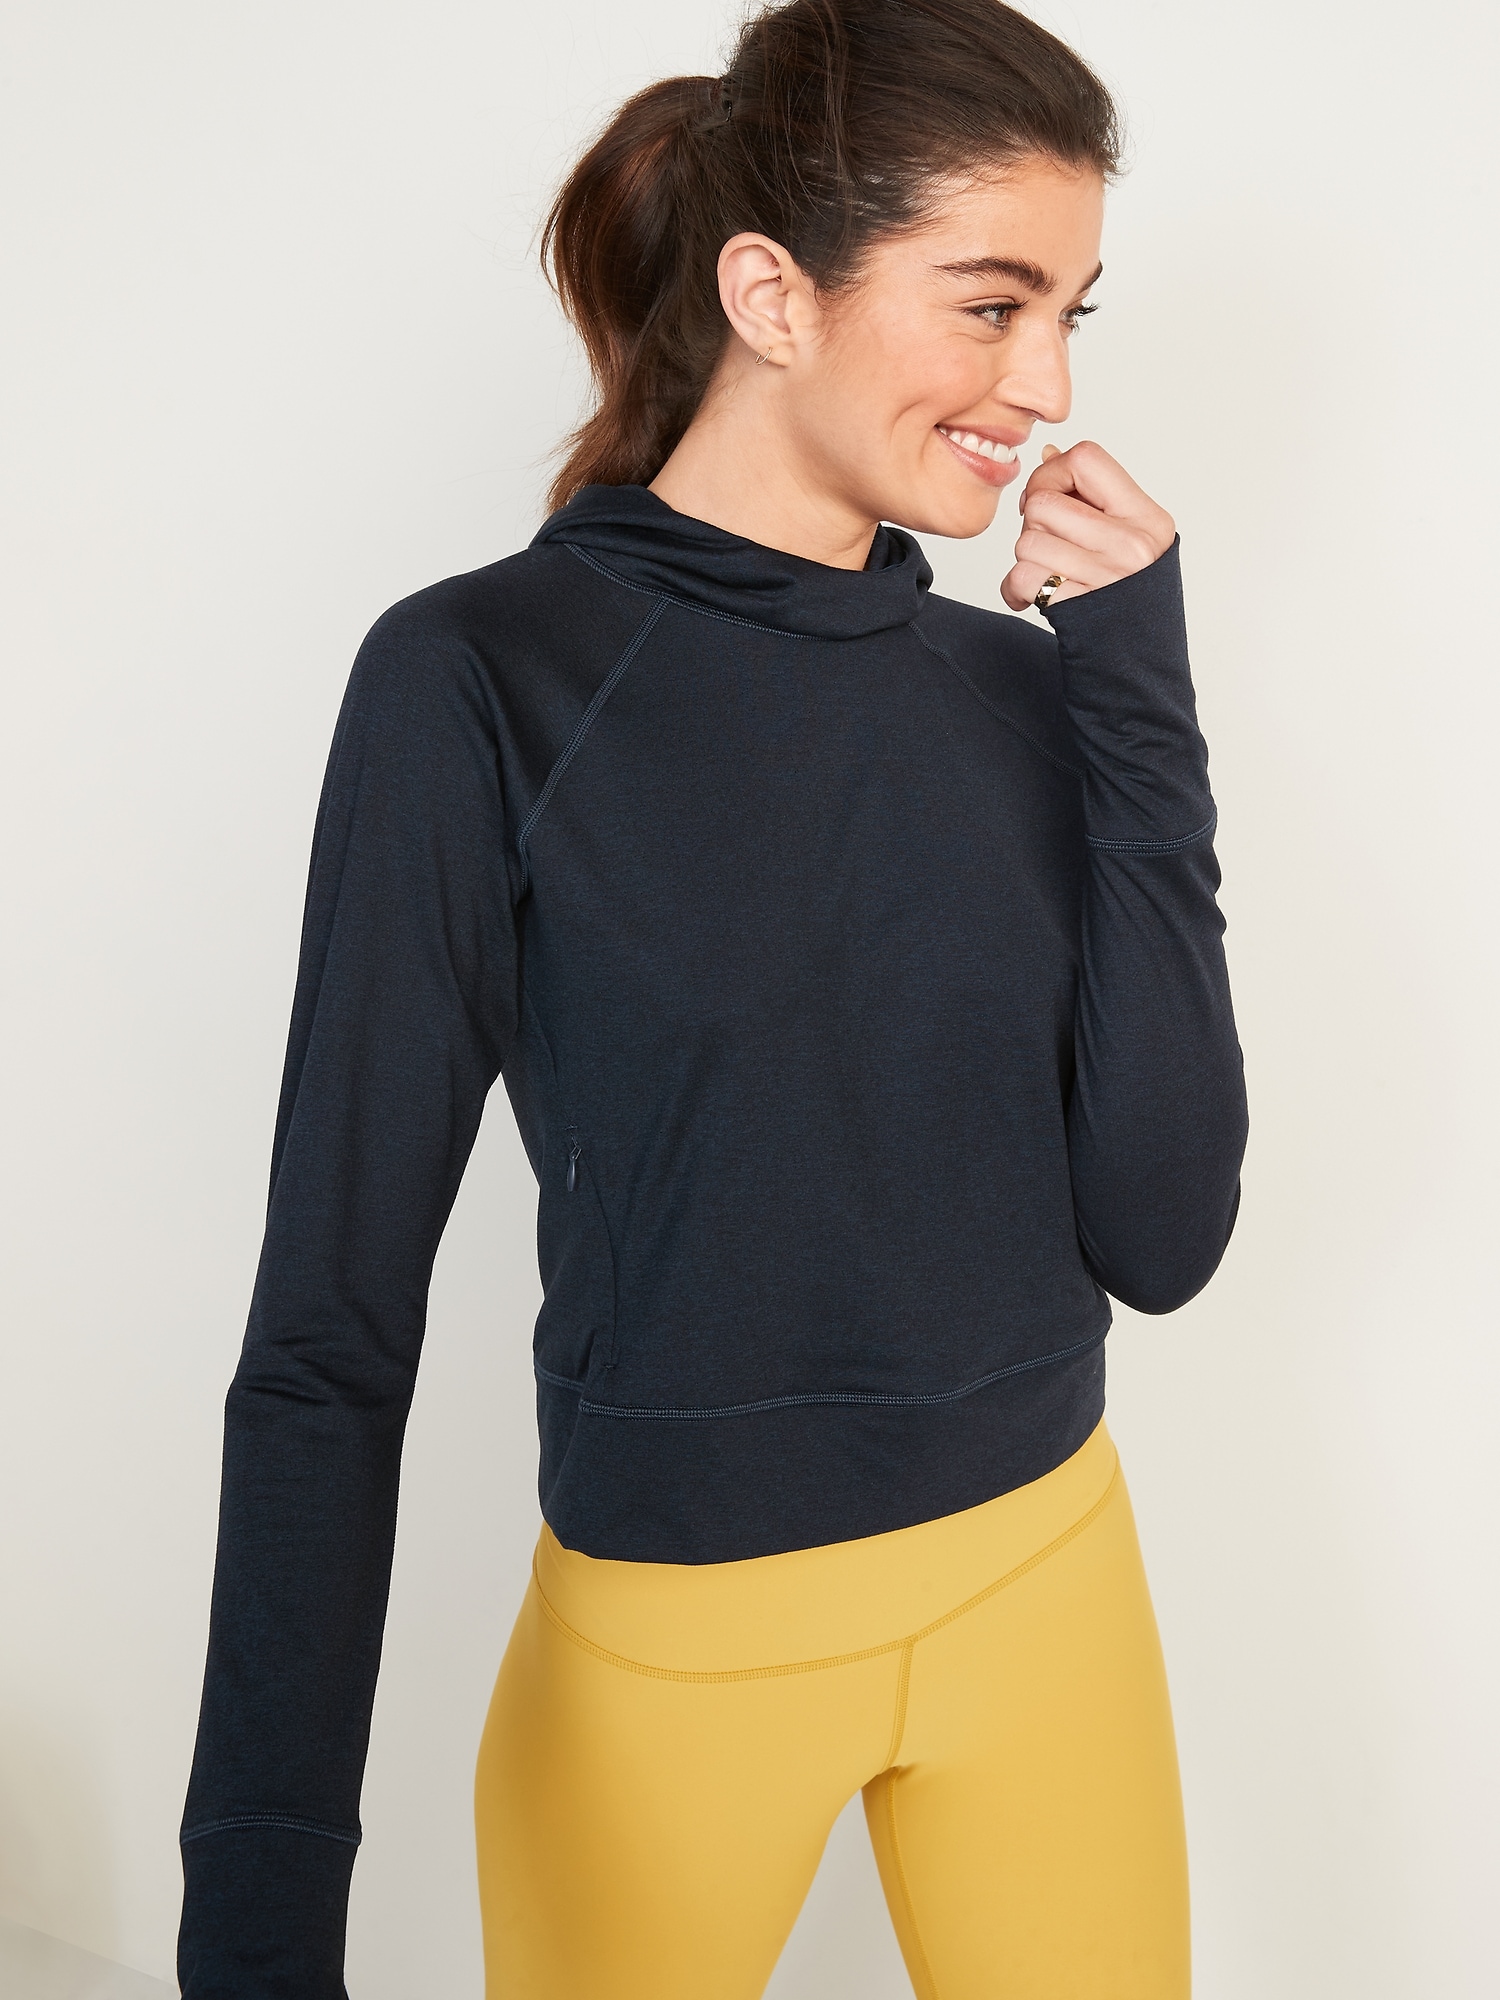 Old Navy CozeCore Cropped Performance Hoodie for Women